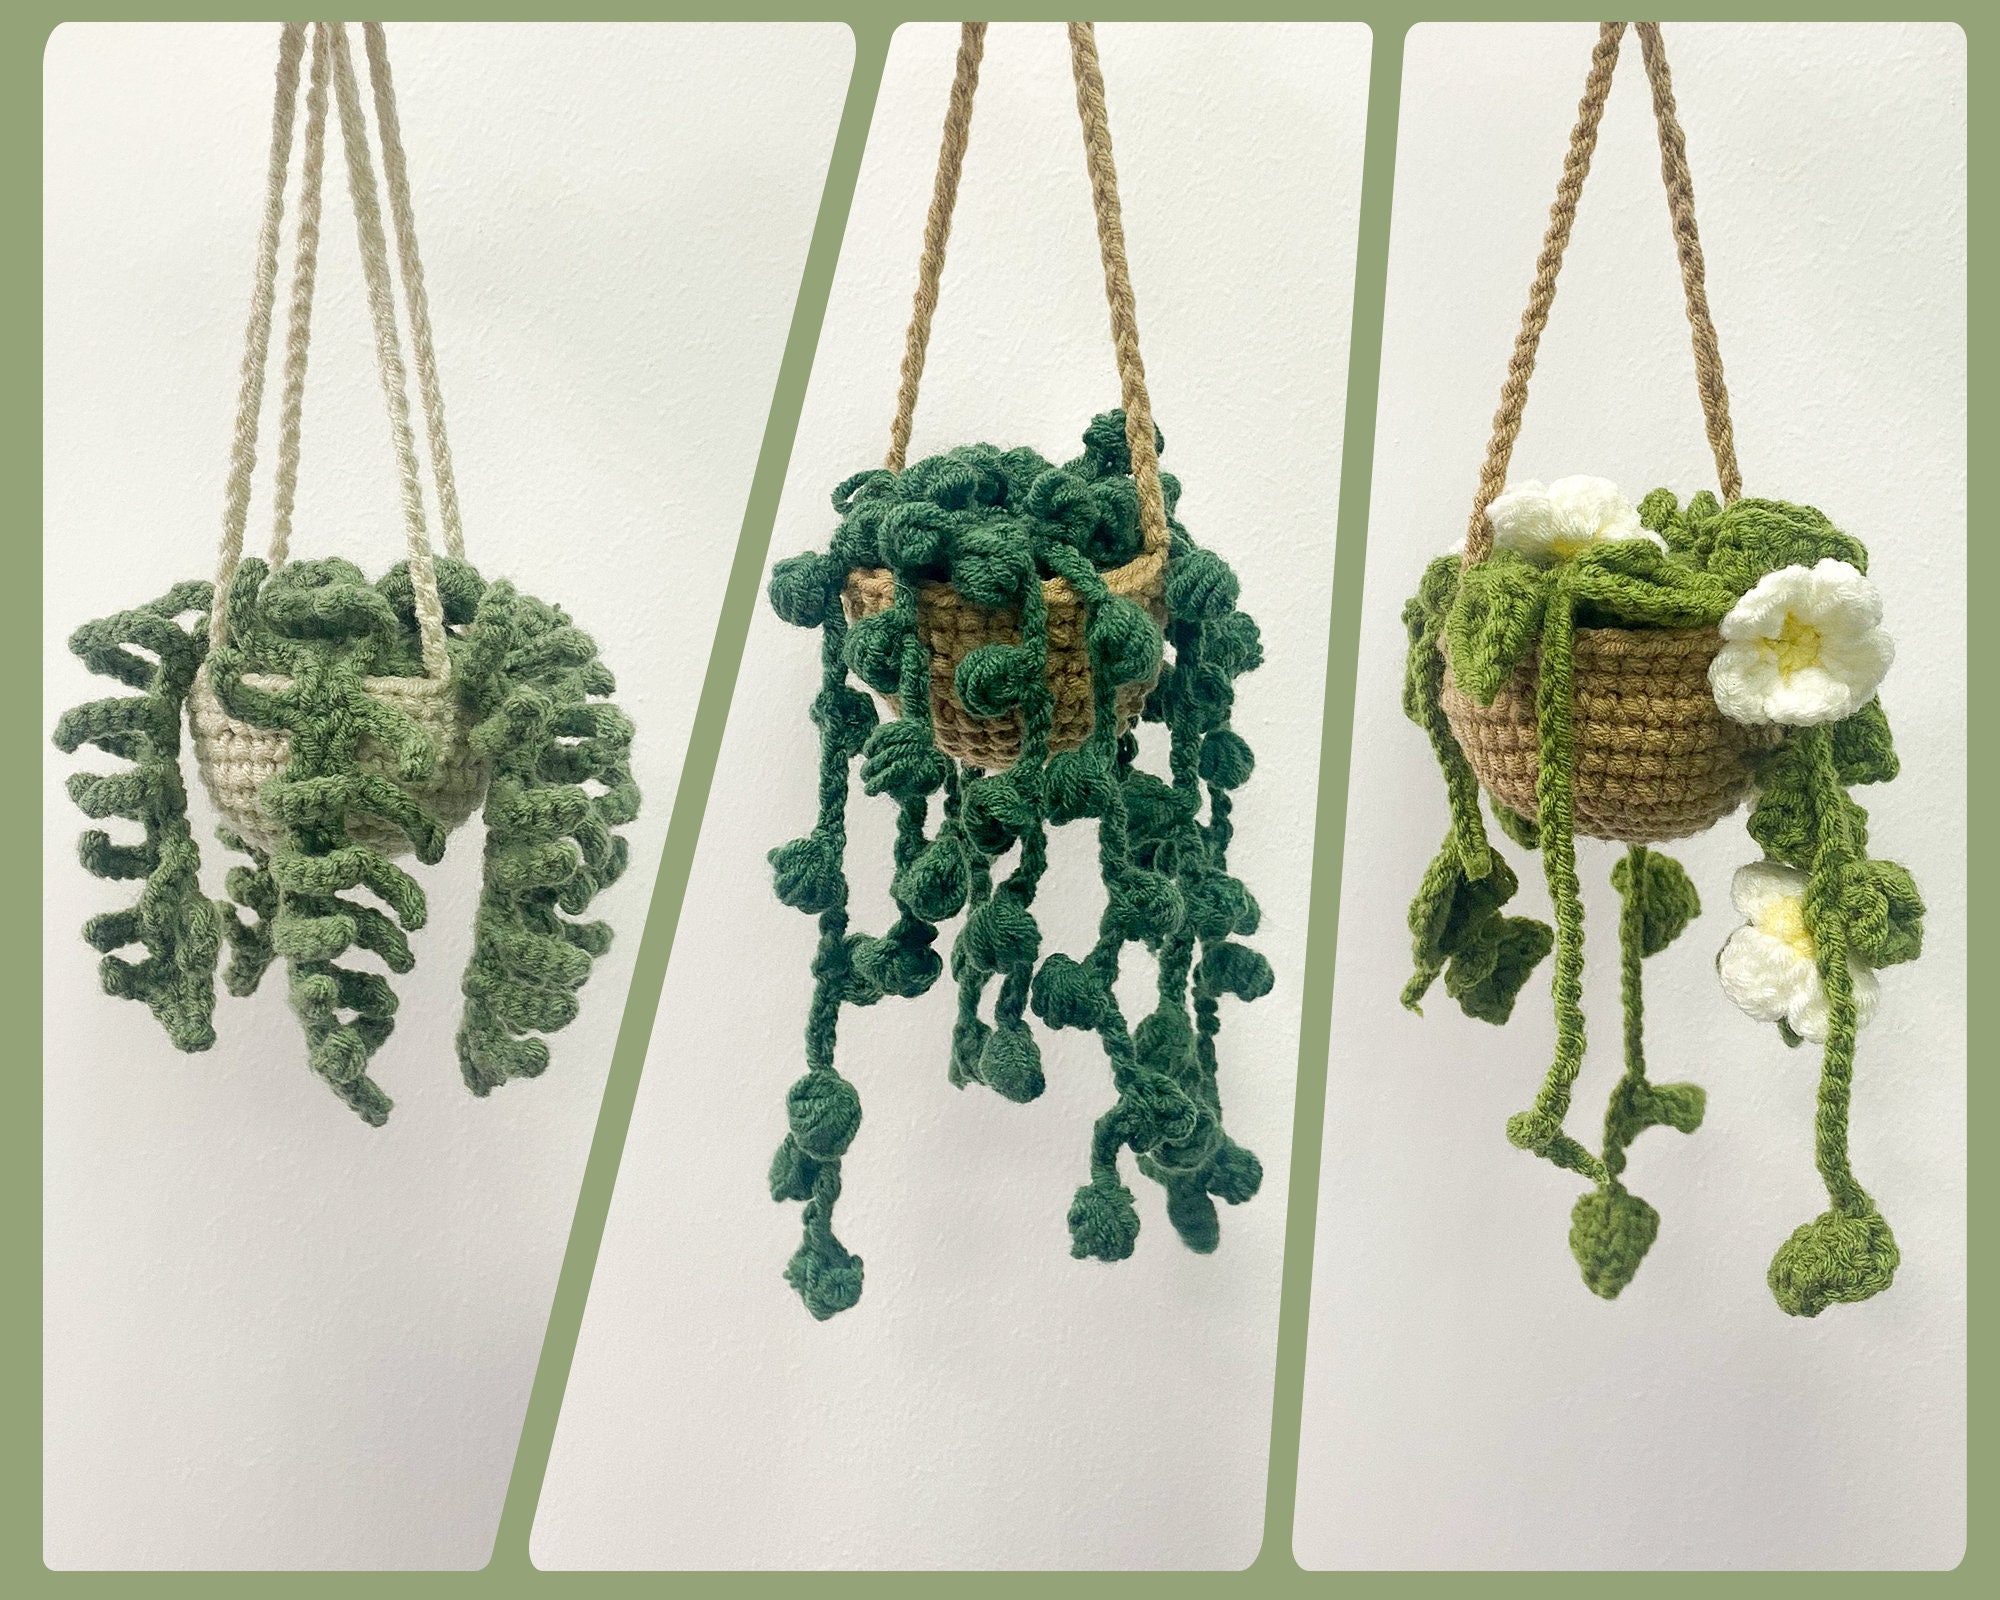 Crochet Succulents Potted Plants Crochet Flower Decoration Knitted